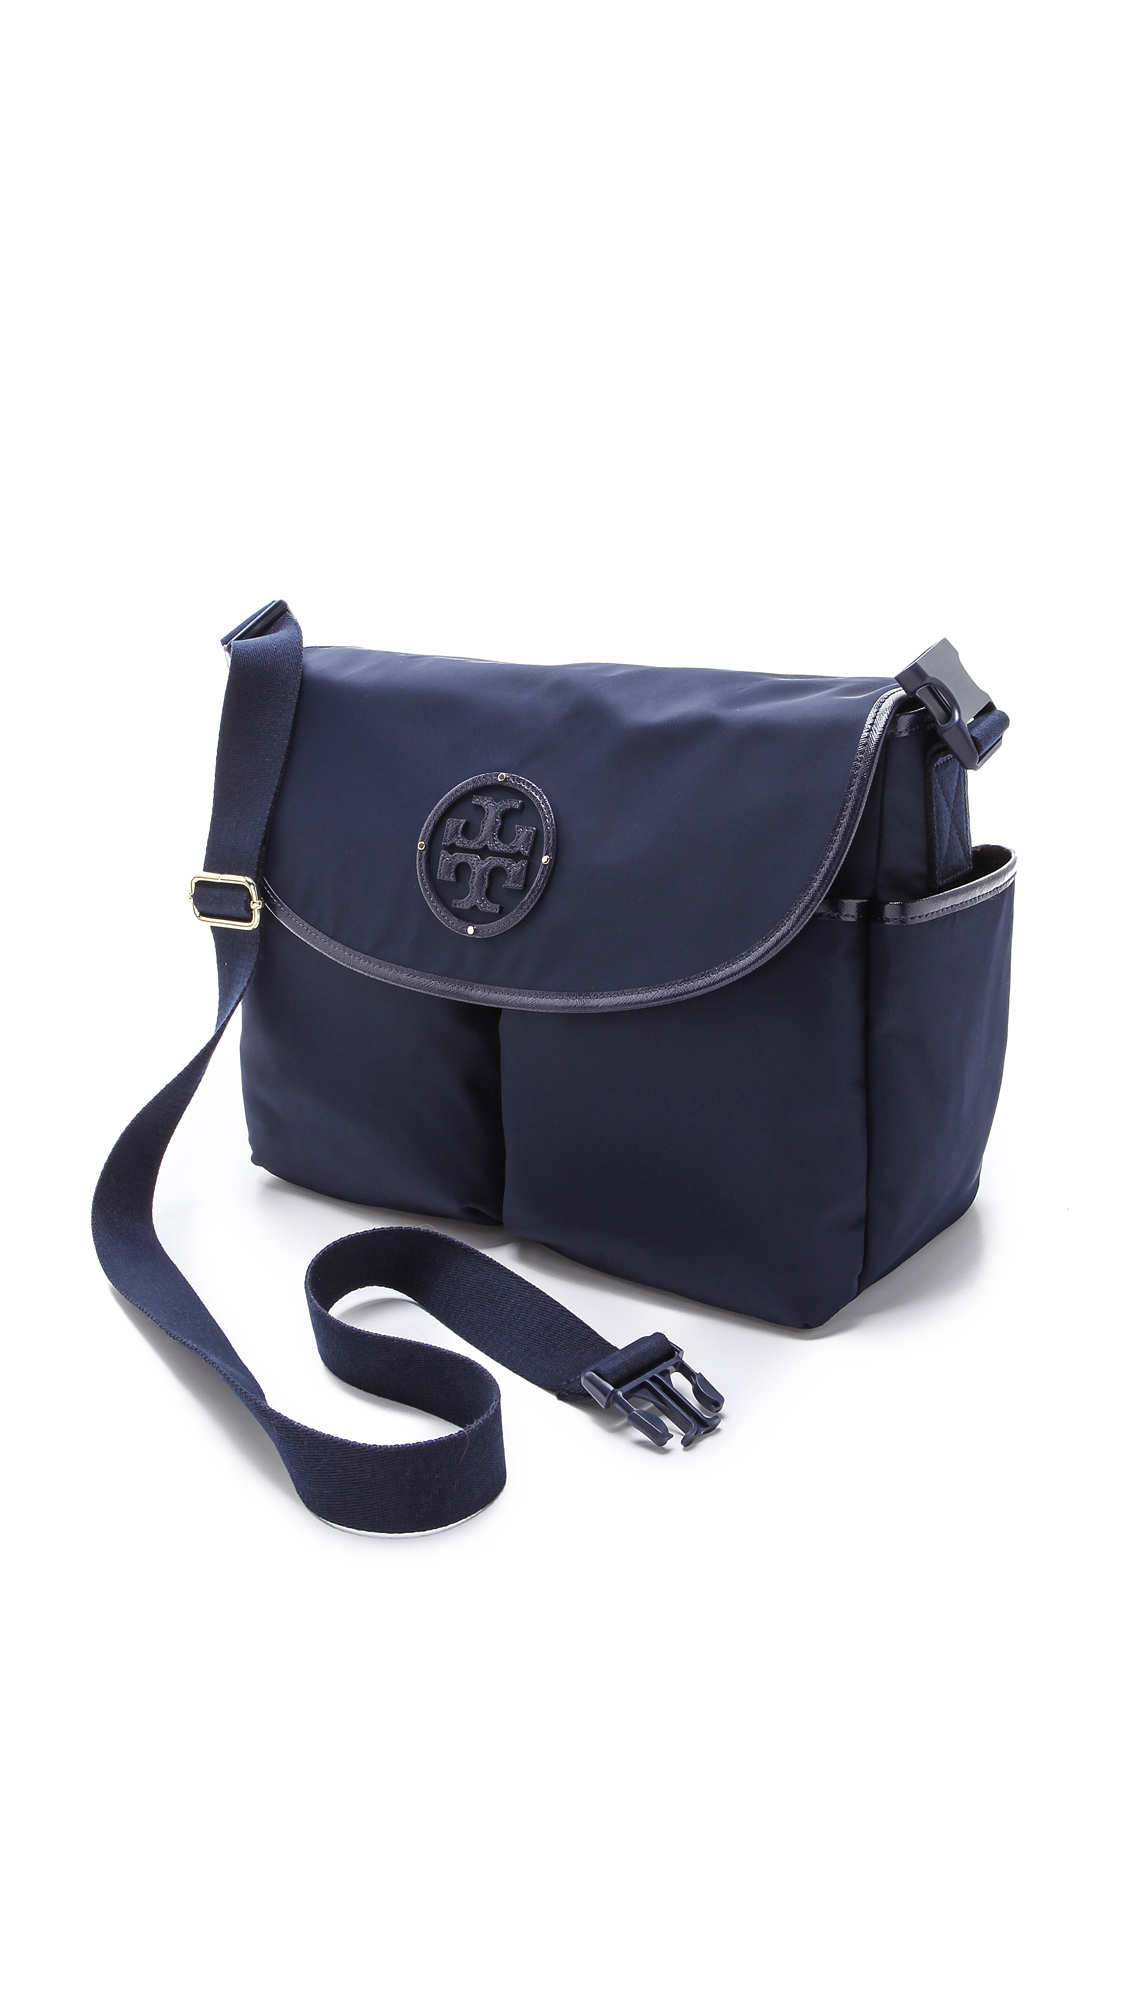 Tory Burch Billy Messenger Baby Bag in Violet Blue (Blue) - Lyst